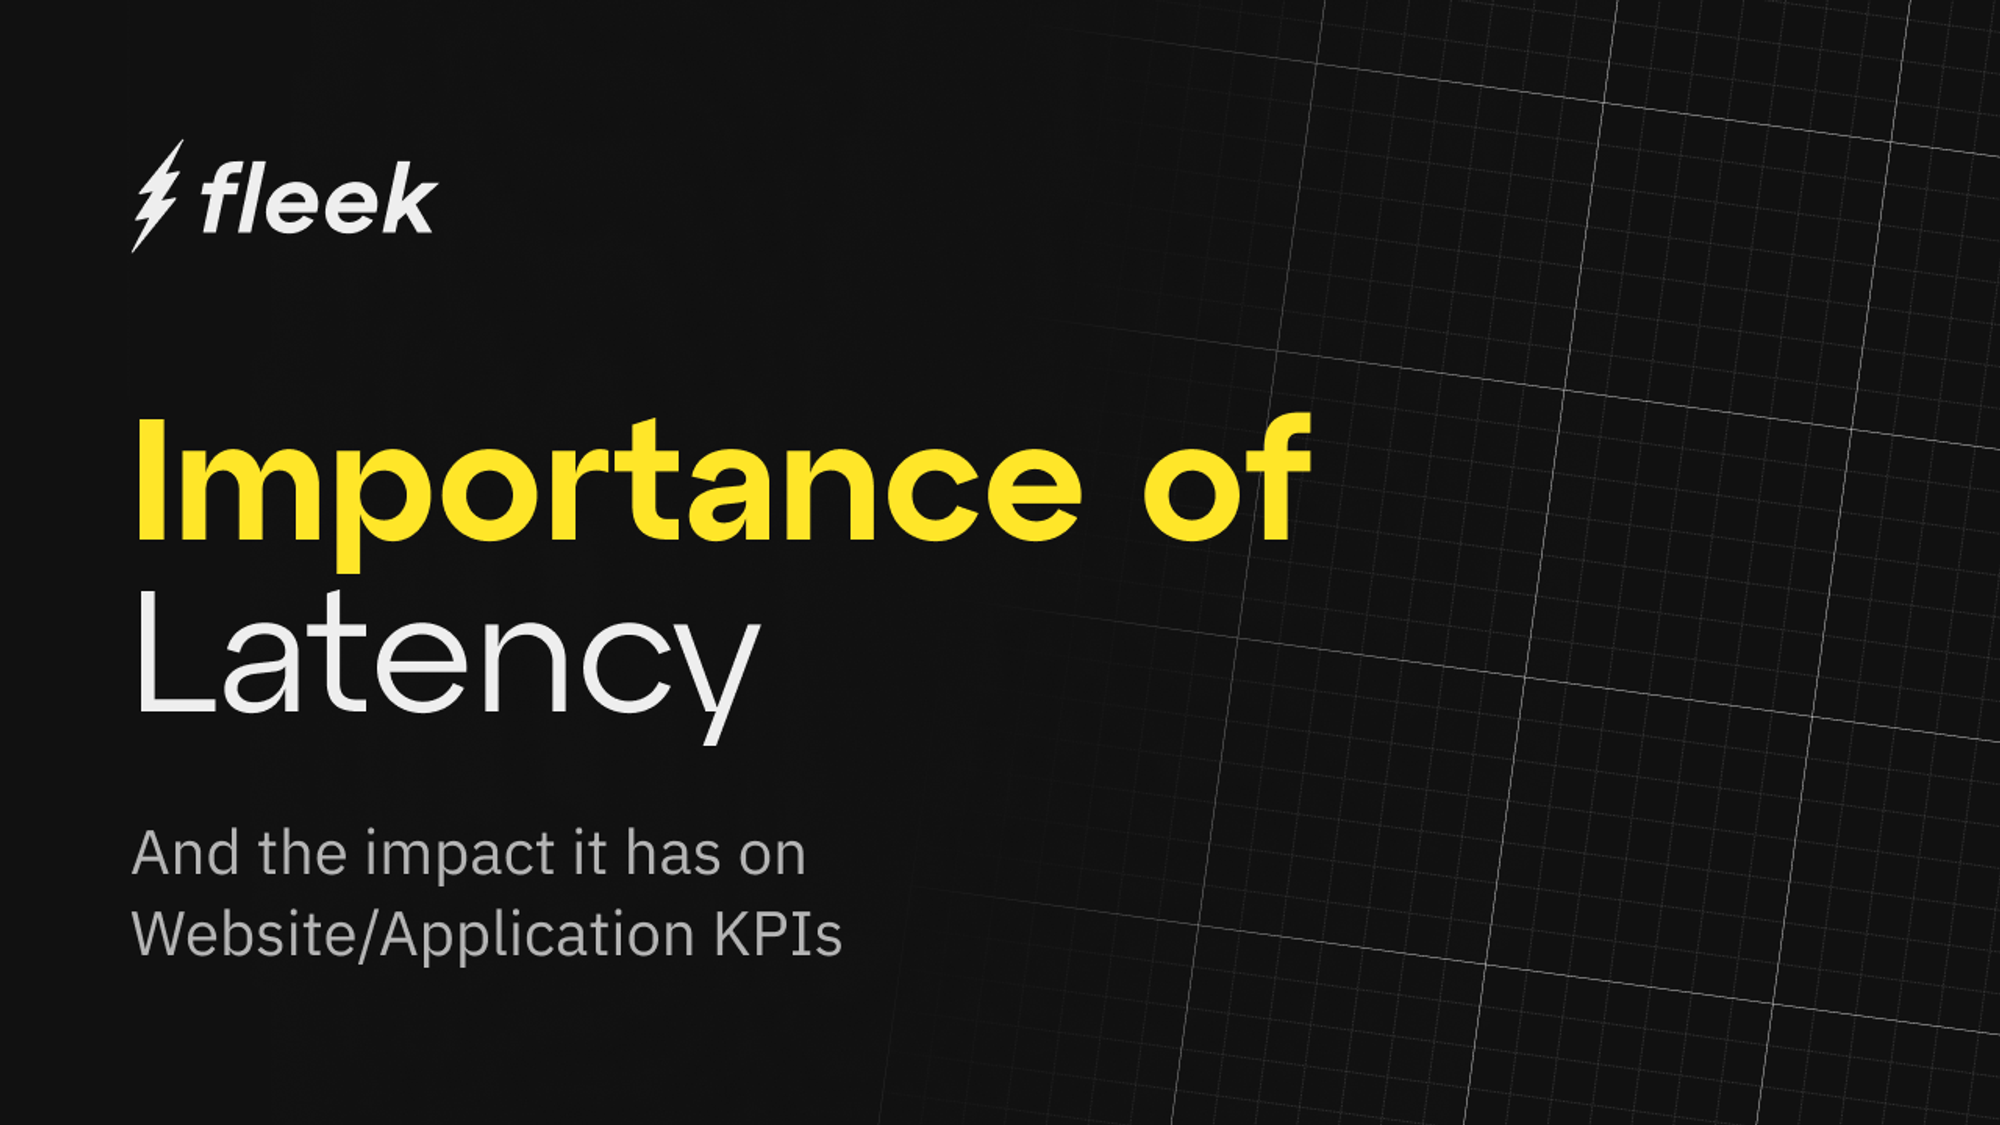 Latency is King: Why Speed is Critical for Building Apps + How to Speed Up Your App